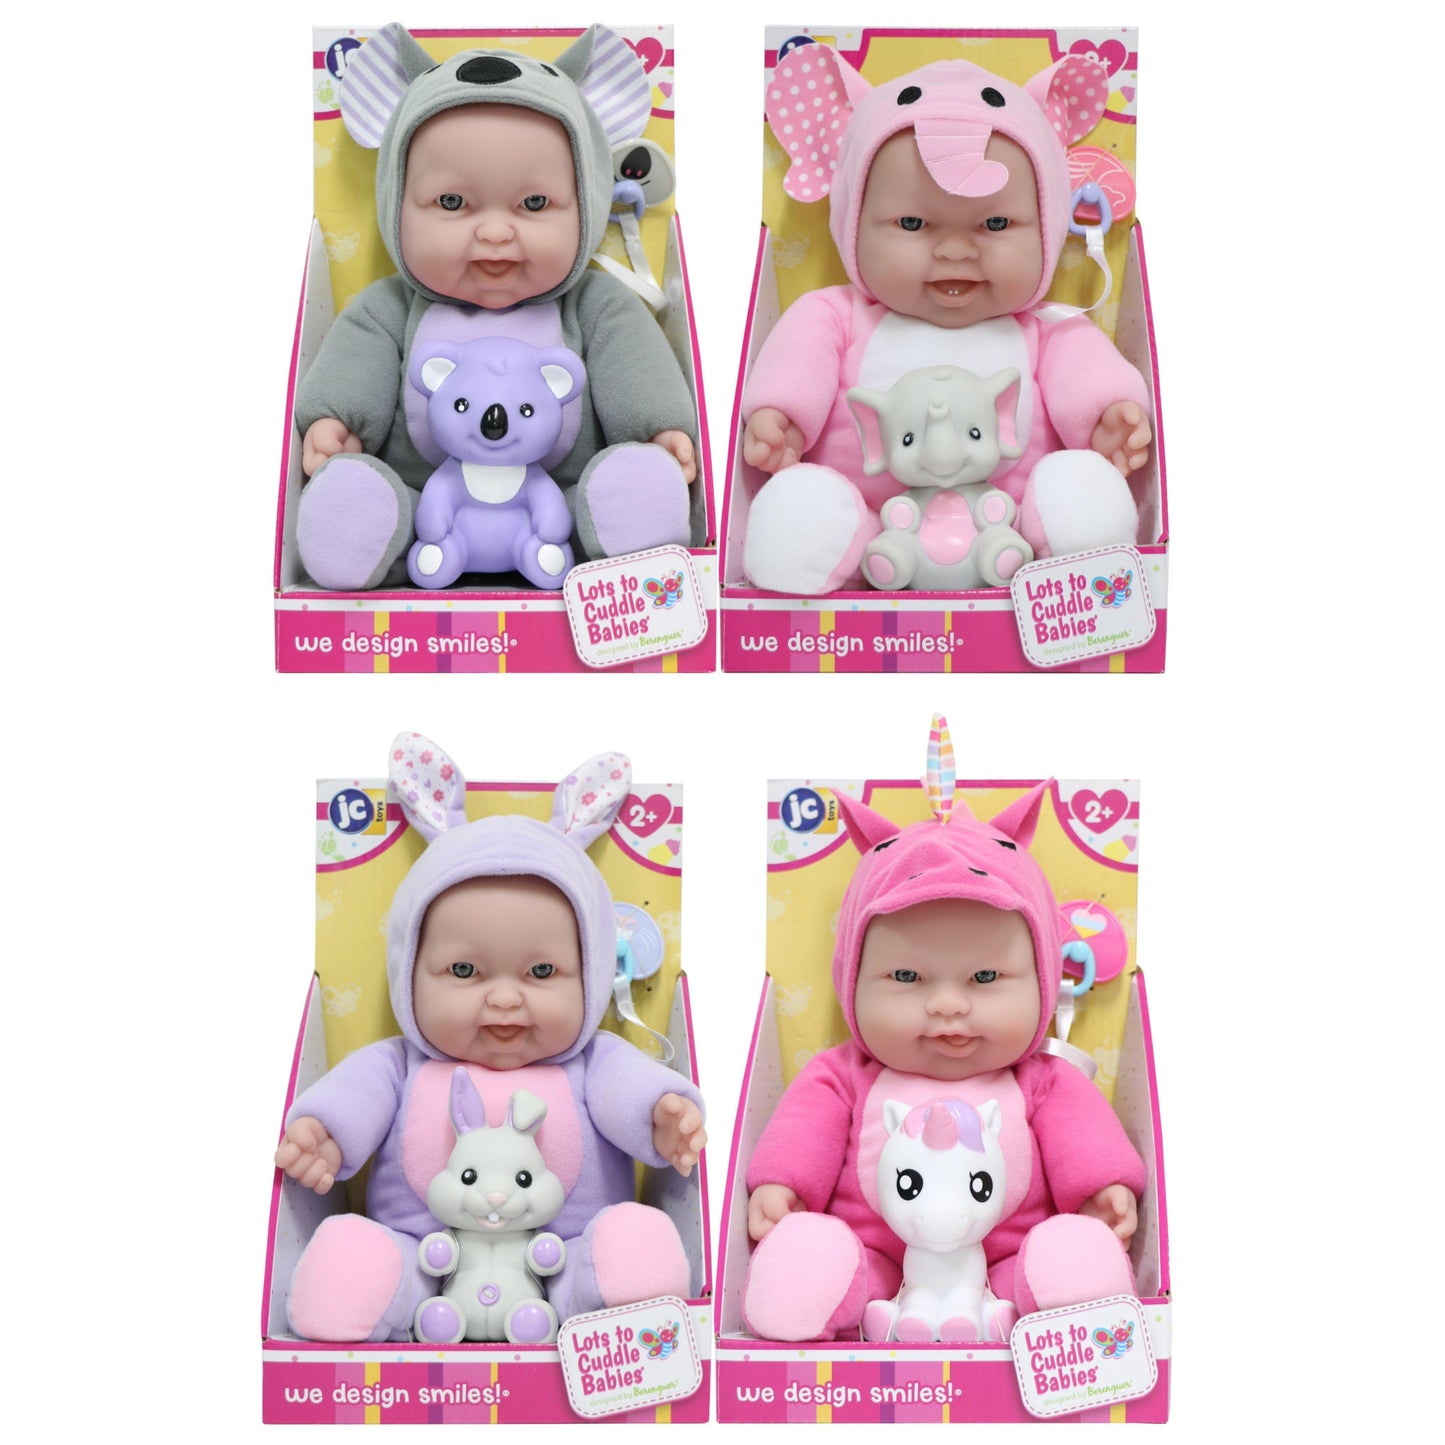 JC Toys, Lots to Cuddle Babies 12" Soft Body Baby Doll in Assorted Animal Outfits with Accessories and Pacifier. - JC Toys Group Inc.